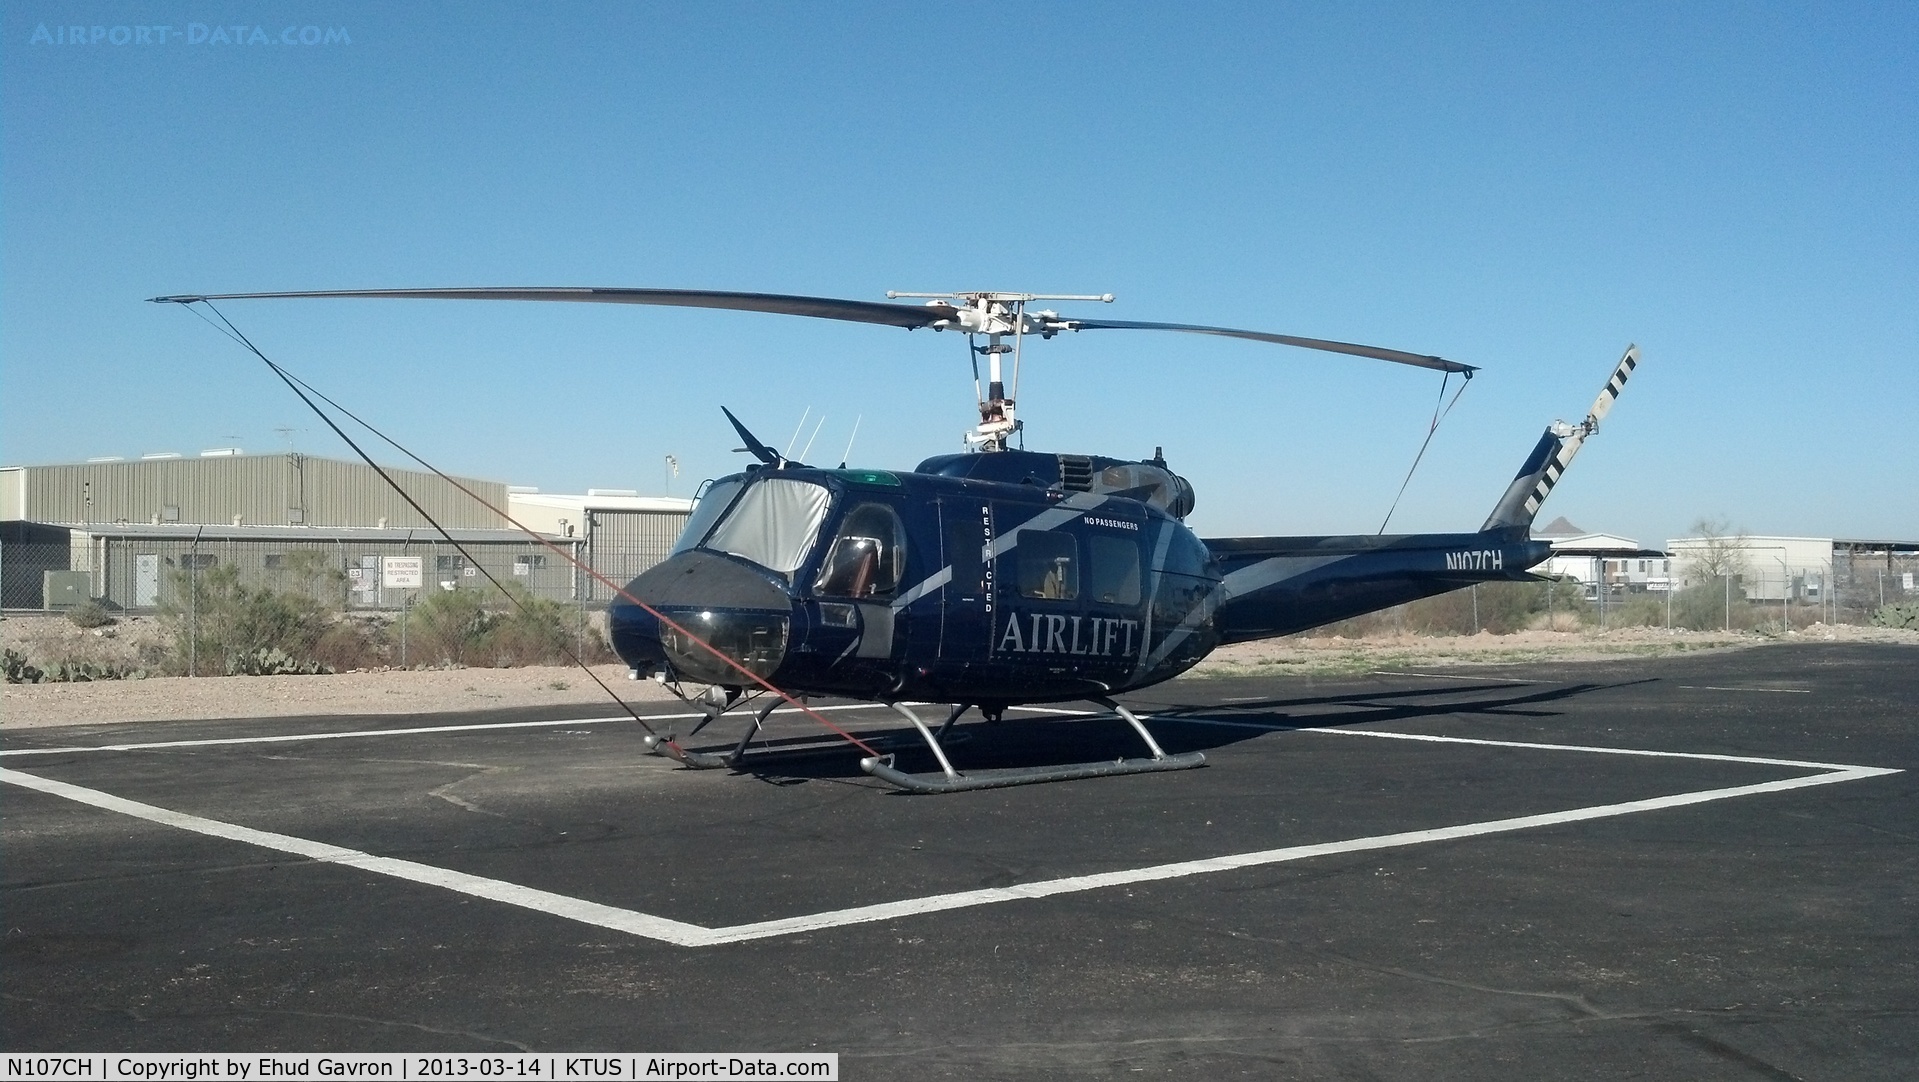 N107CH, 1967 Bell UH-1H Iroquois C/N 9488 (67-17290), N107CH parked and tied down at Southwest Helicopters, Tucson Arizona.